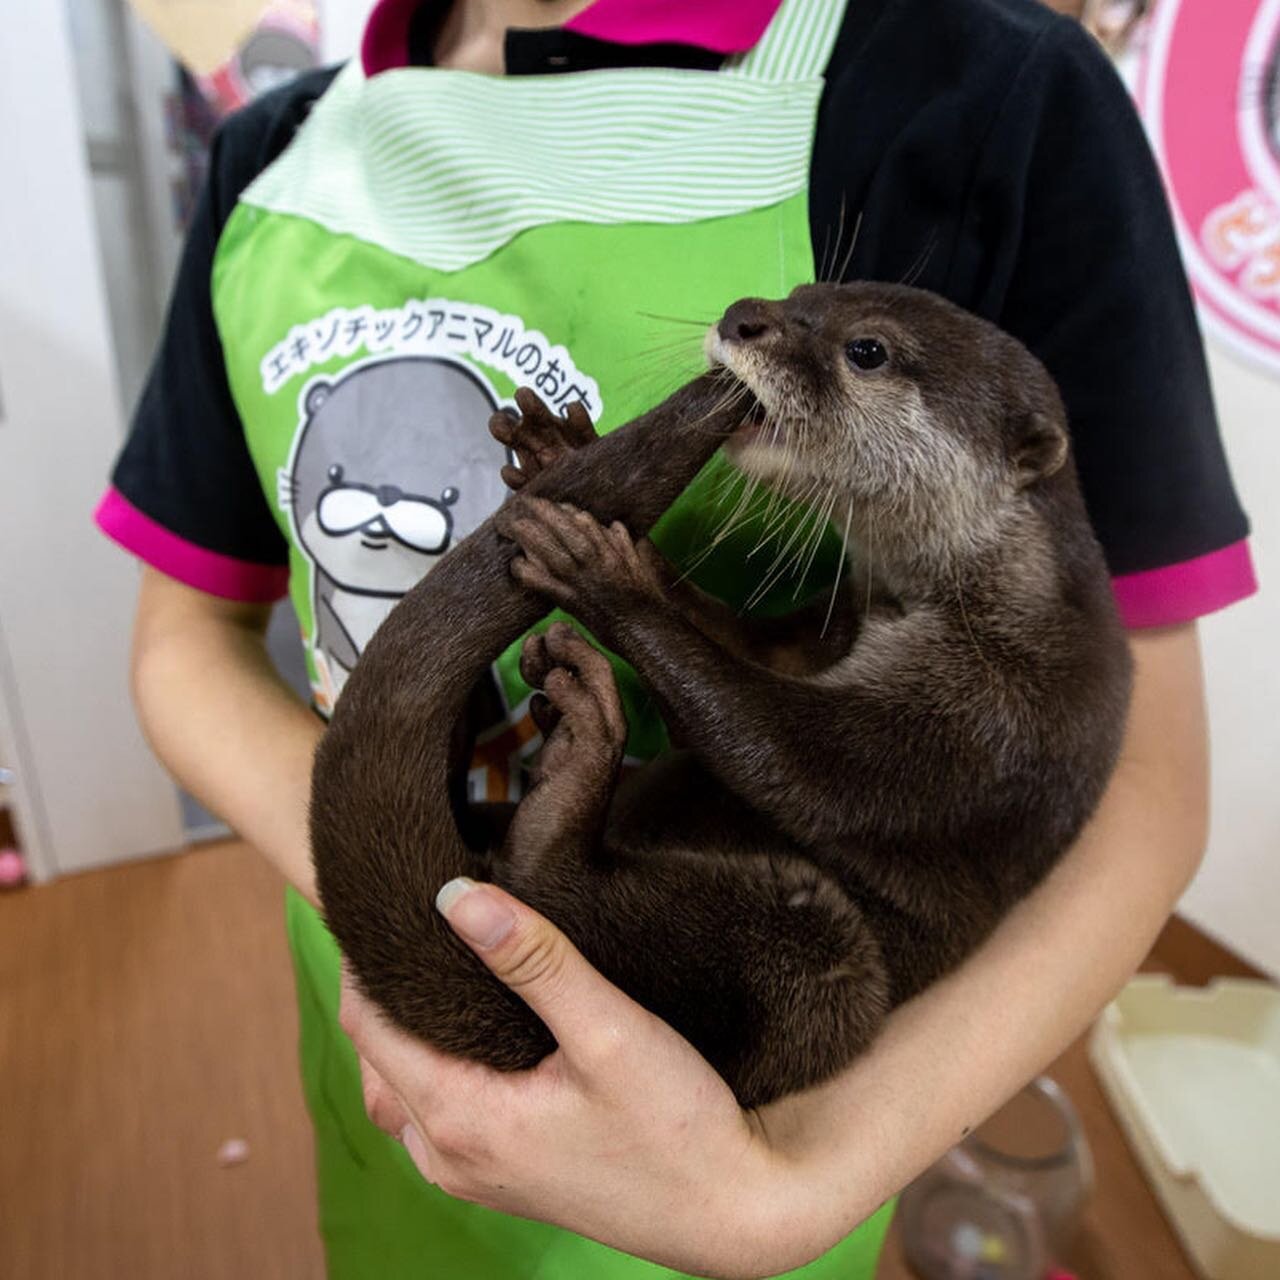 Japanese otter cafes and social media influencers are driving increased demand for pet otters all over the world, with devastating consequences. These otters might be adorable, but the truth behind this trade is anything but. Ripped from the wild or 